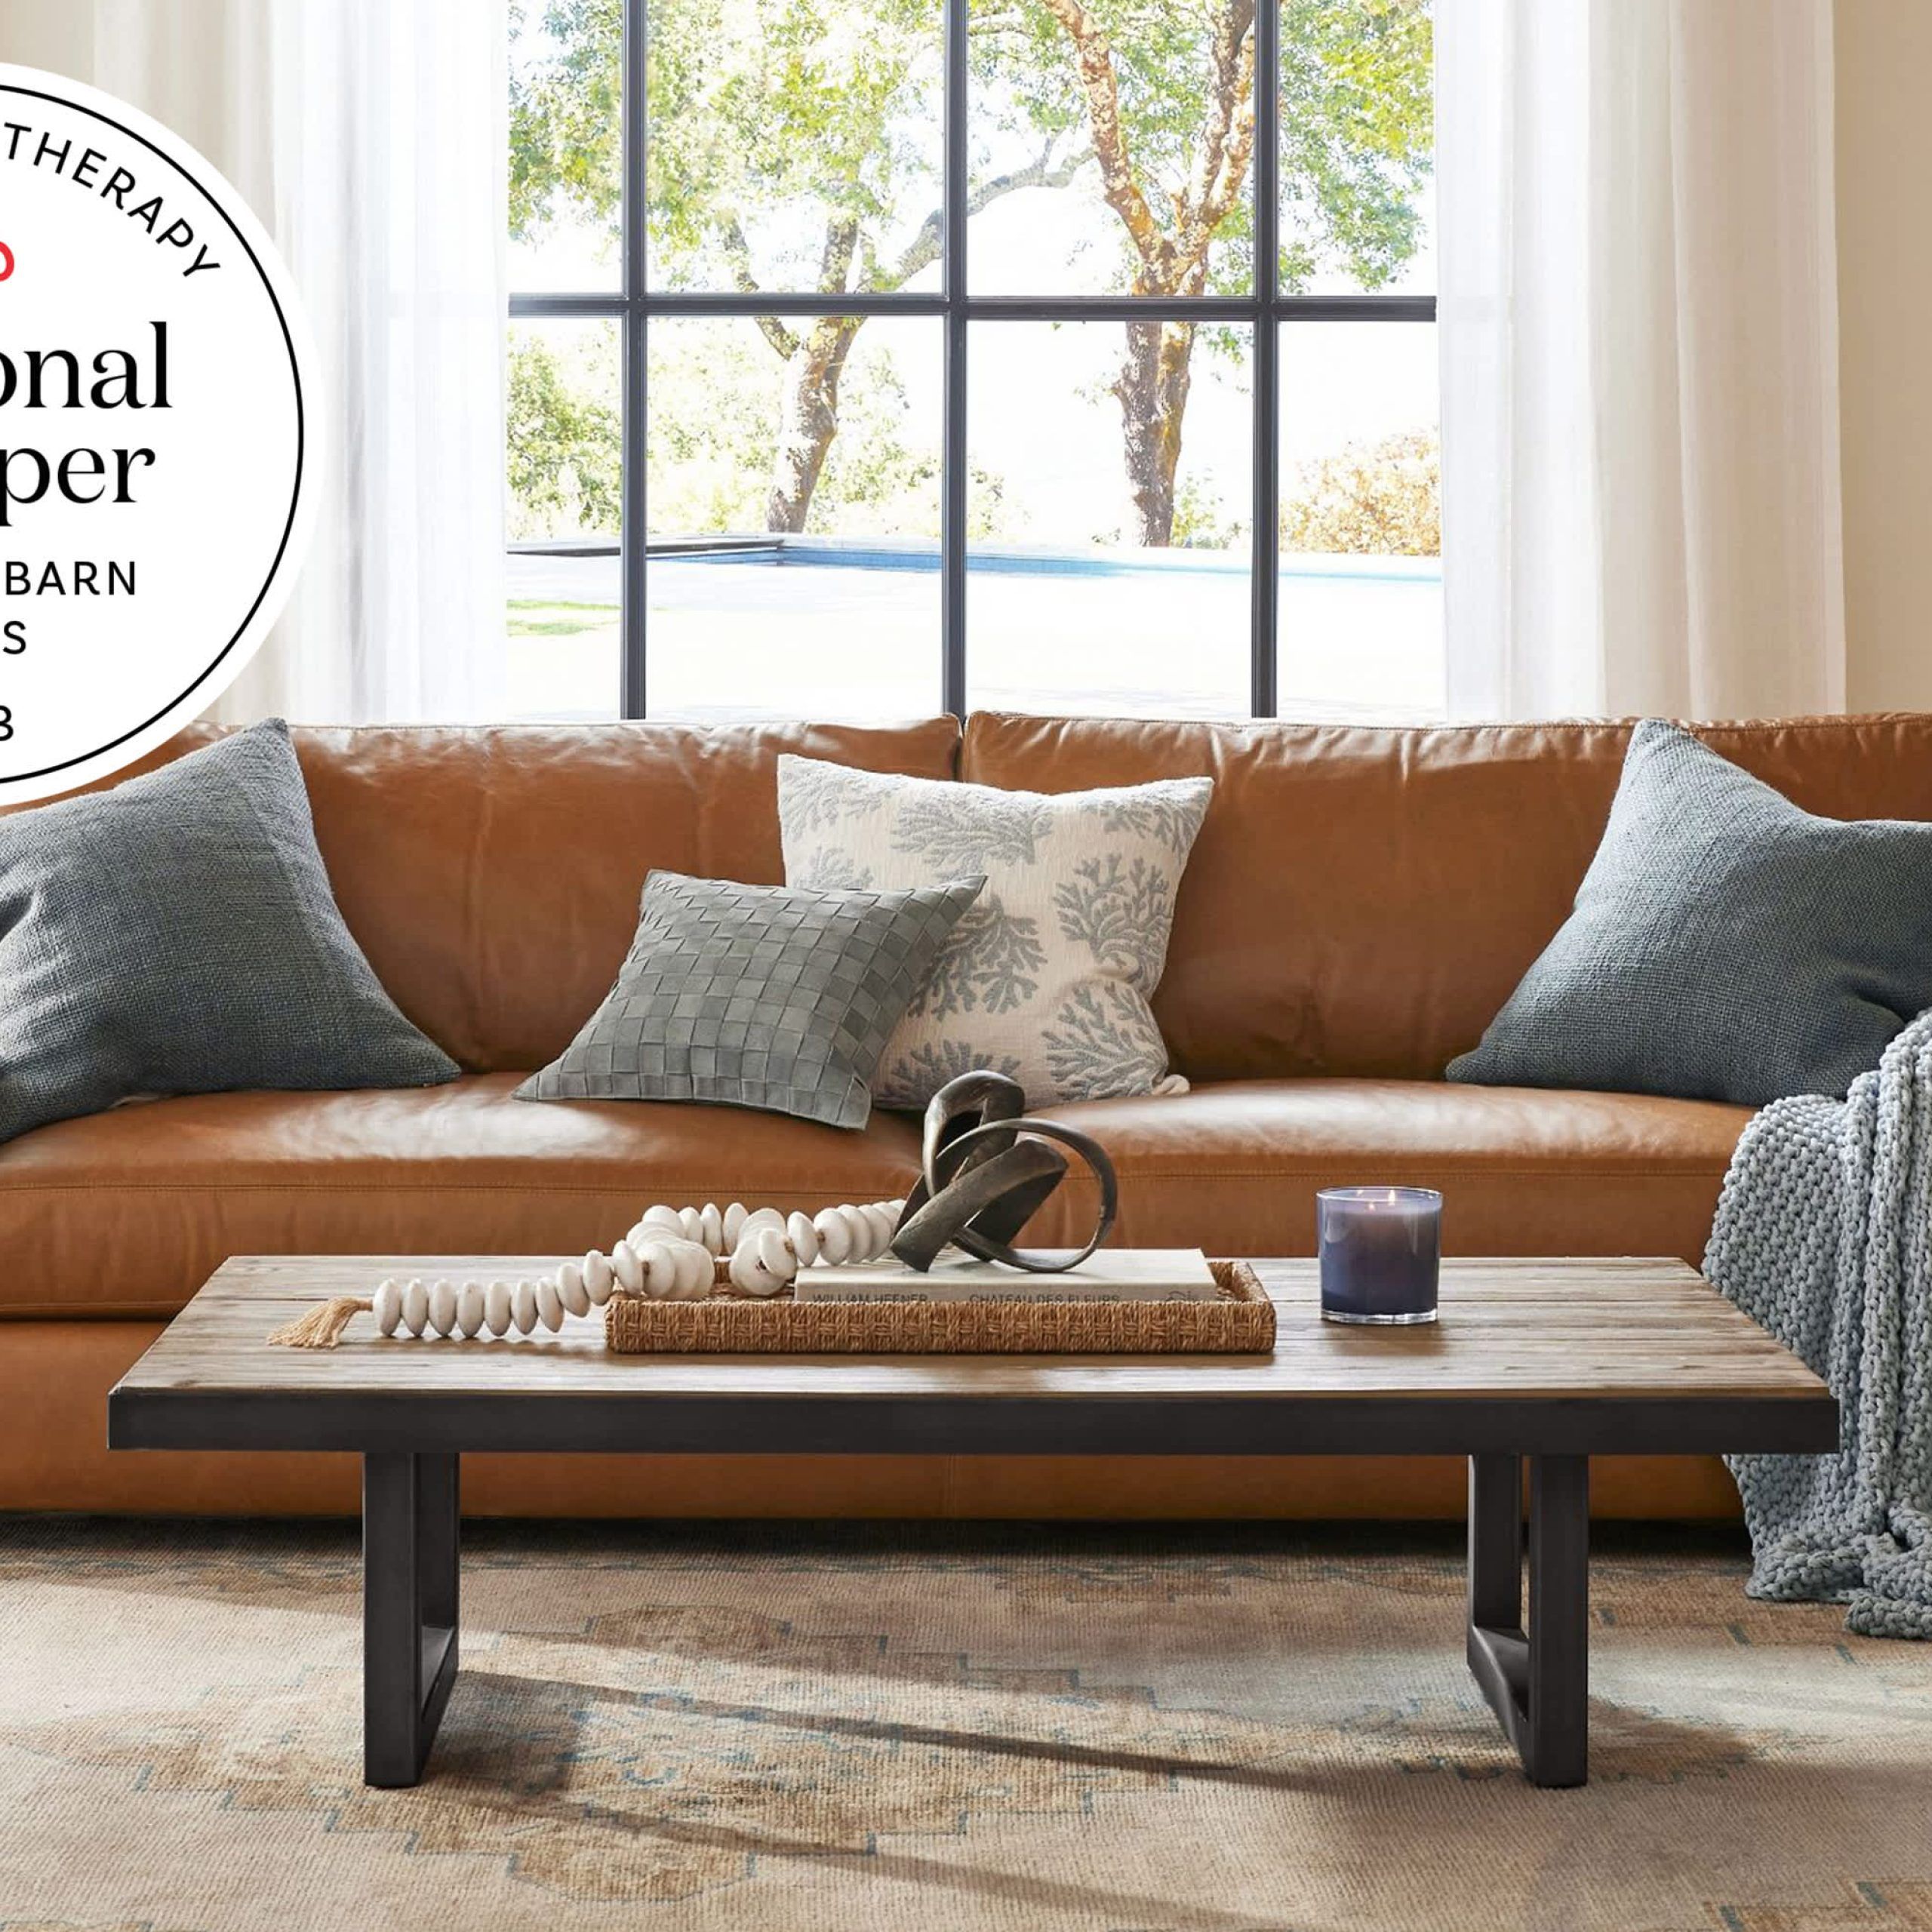 We Tested (and Rated!) All Pottery Barn Sofas And Sectionals For 2023 |  Apartment Therapy Regarding Sofas With Ottomans In Brown (View 14 of 15)